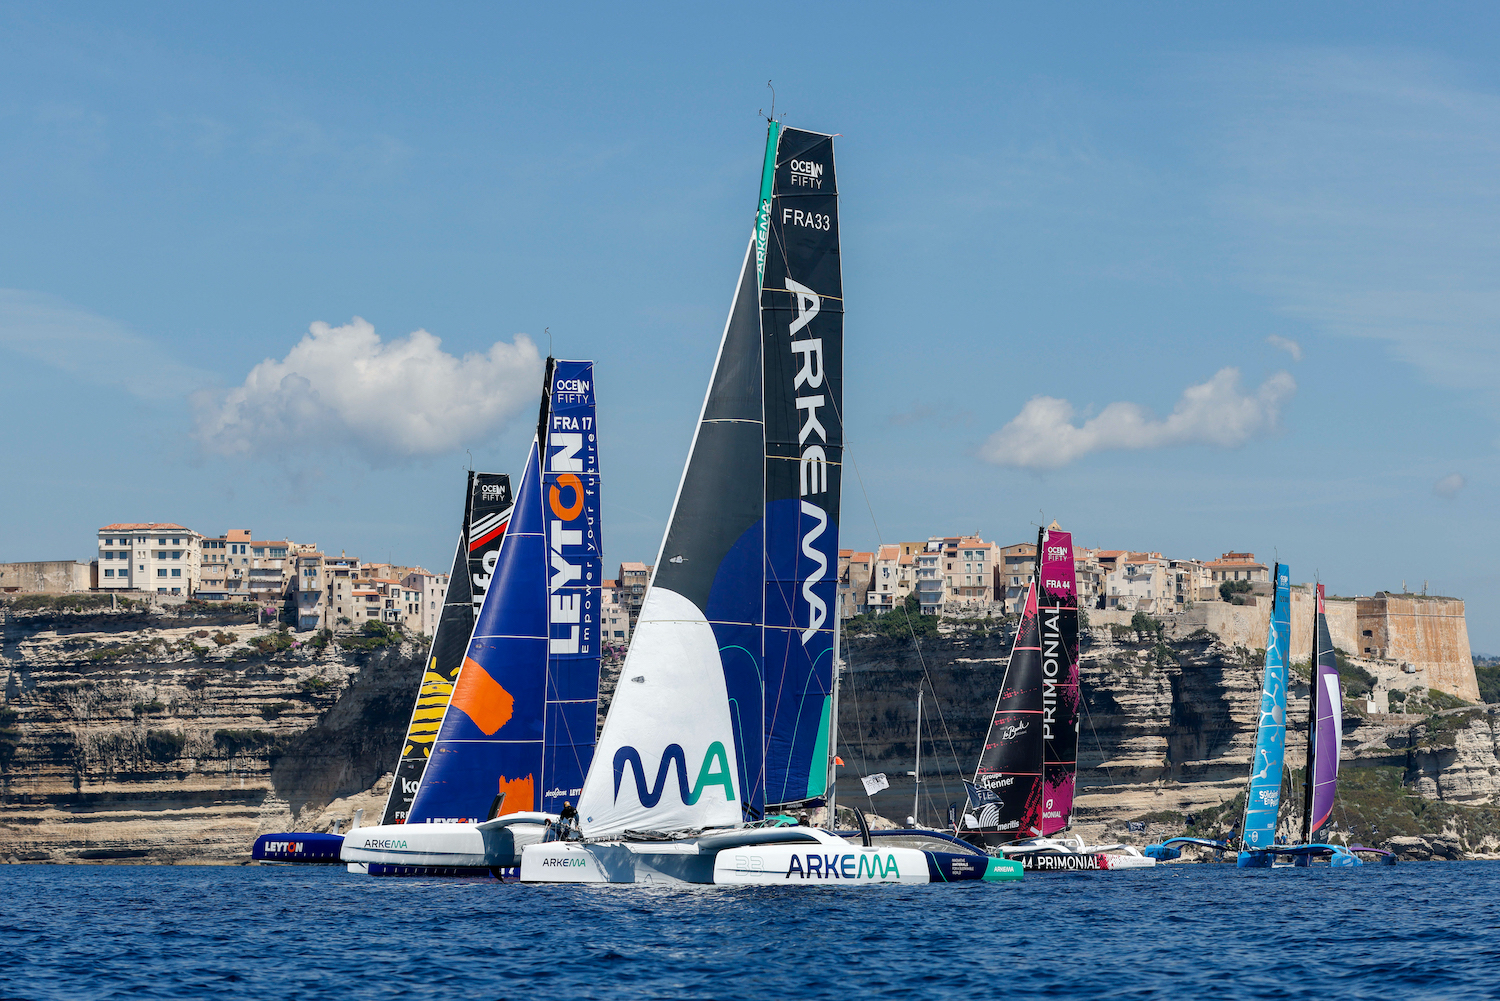 BONIFACIO, FRANCE - MAY 12: Ocean Fifty Arkema trimaran, led by Quentin Vlamynck of France, competes both inshore and offshore on the island of Corsica during Episode 1 of the Pro Sailing Tour in the Bay of Bonifacio on May 12, 2022 in Bonifacio, Corsica, France. (Photo by Lloyd Images/Pro Sailing Tour)